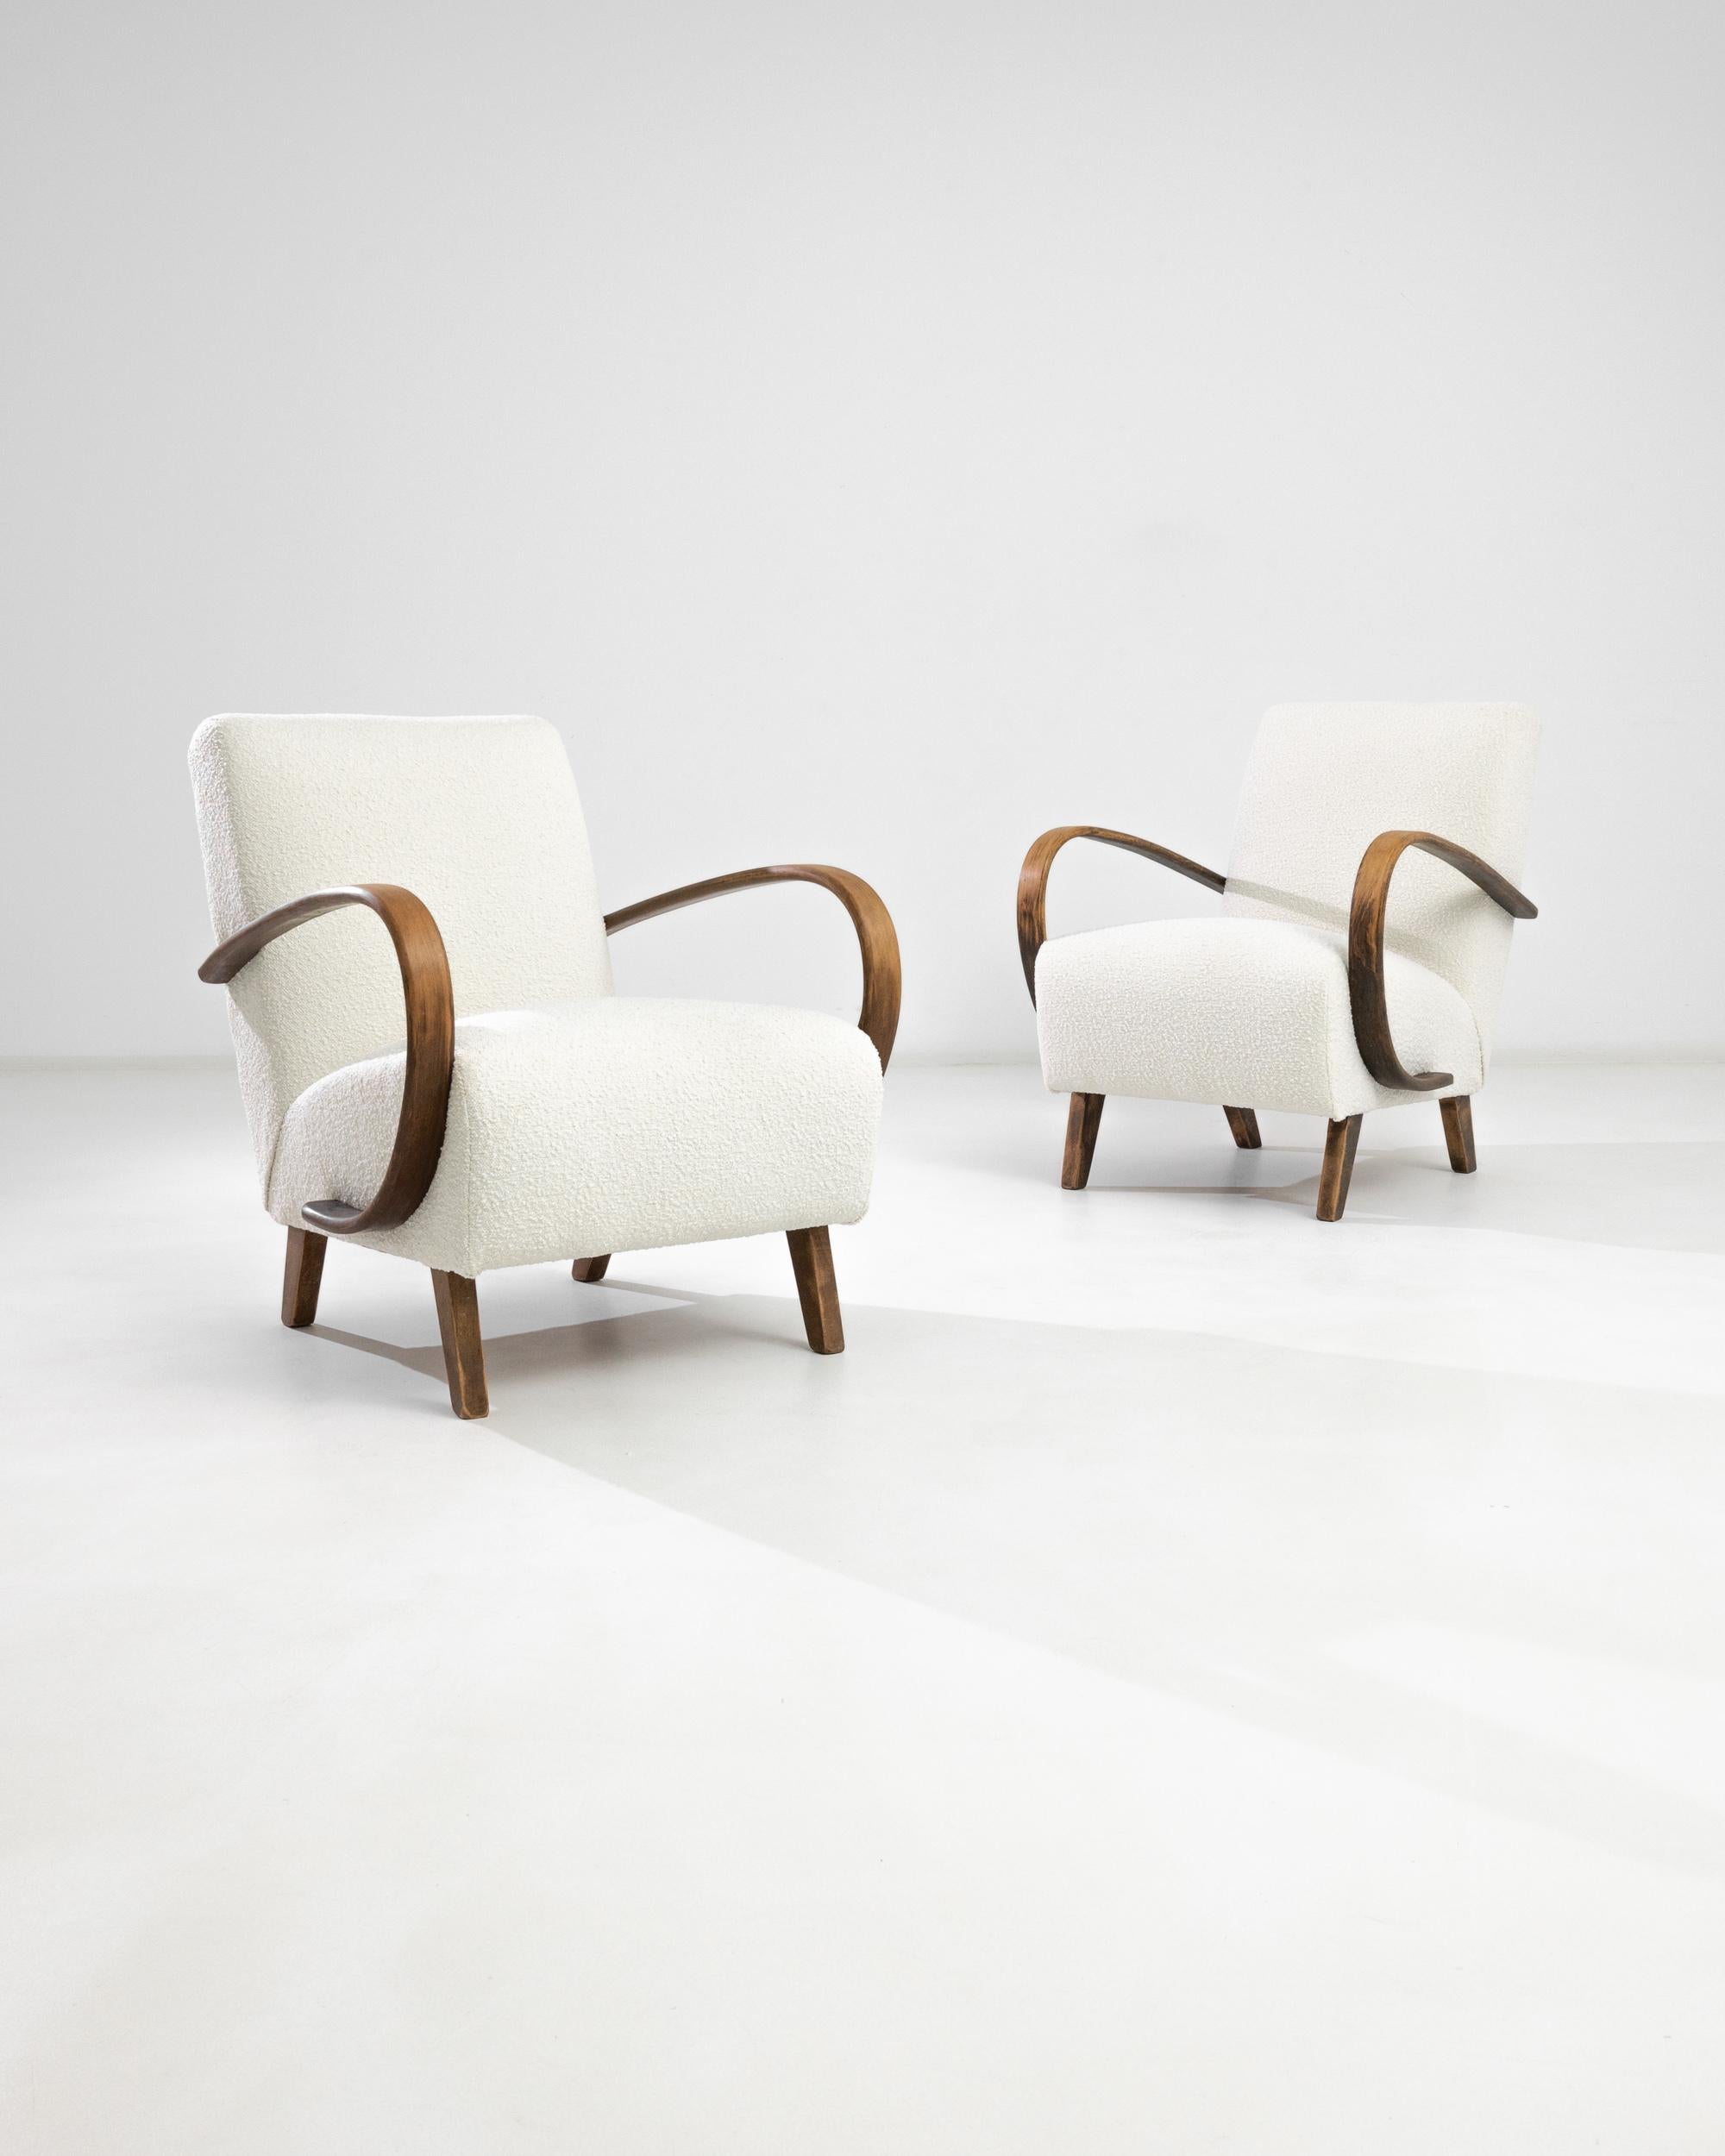 A pair of armchairs by Czech furniture designer J. Halabala. The eye-catching silhouette and comfortable shape has had an enduring appeal. Influenced by Modern and Art Deco design, a deep upholstered seat upon angled wooden feet is framed by the